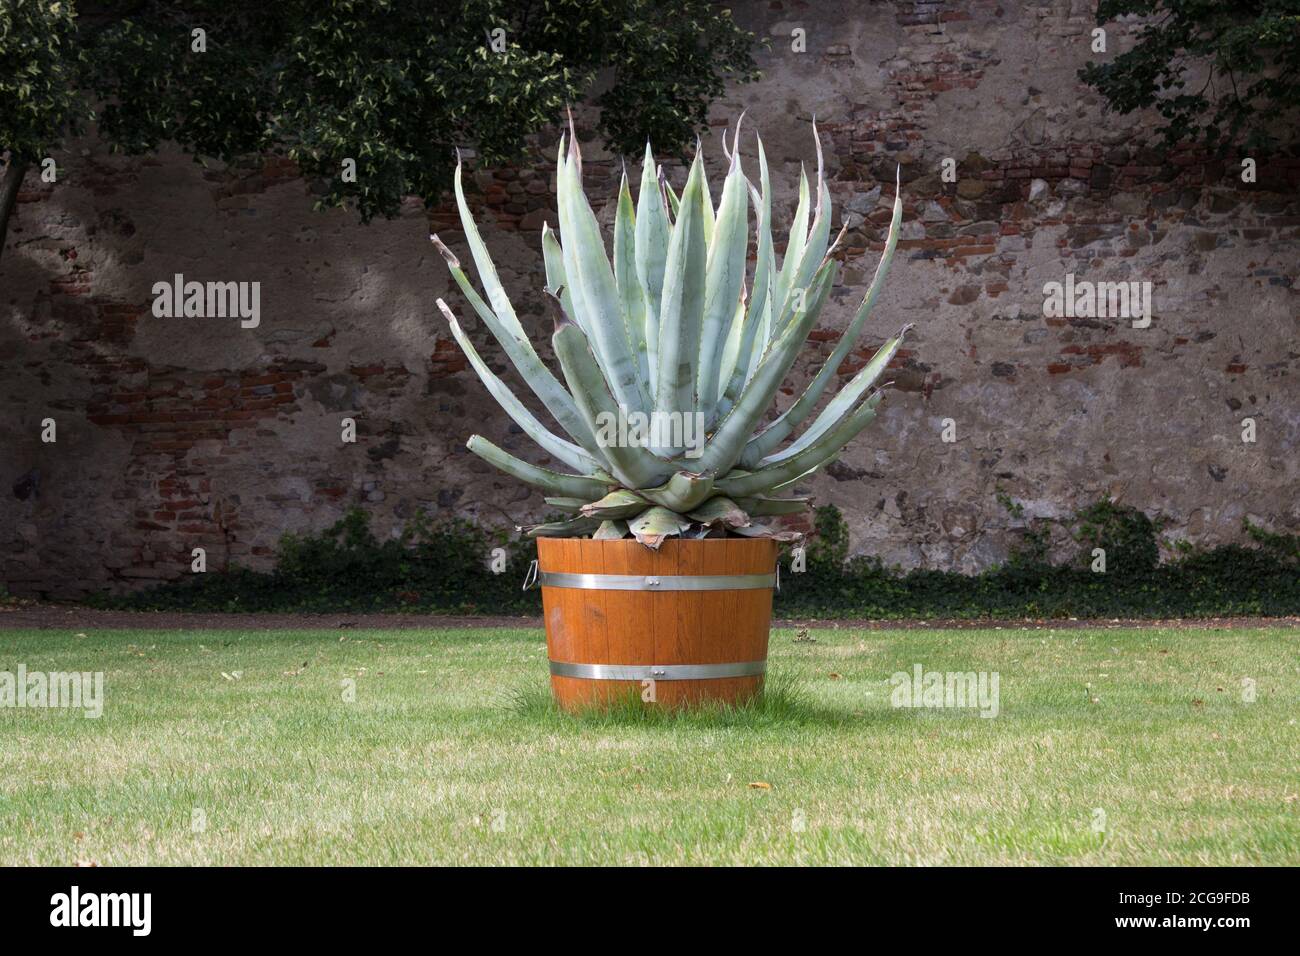 Yucca filamentosa on the lawn in a pot, in the background is a brick wall Stock Photo